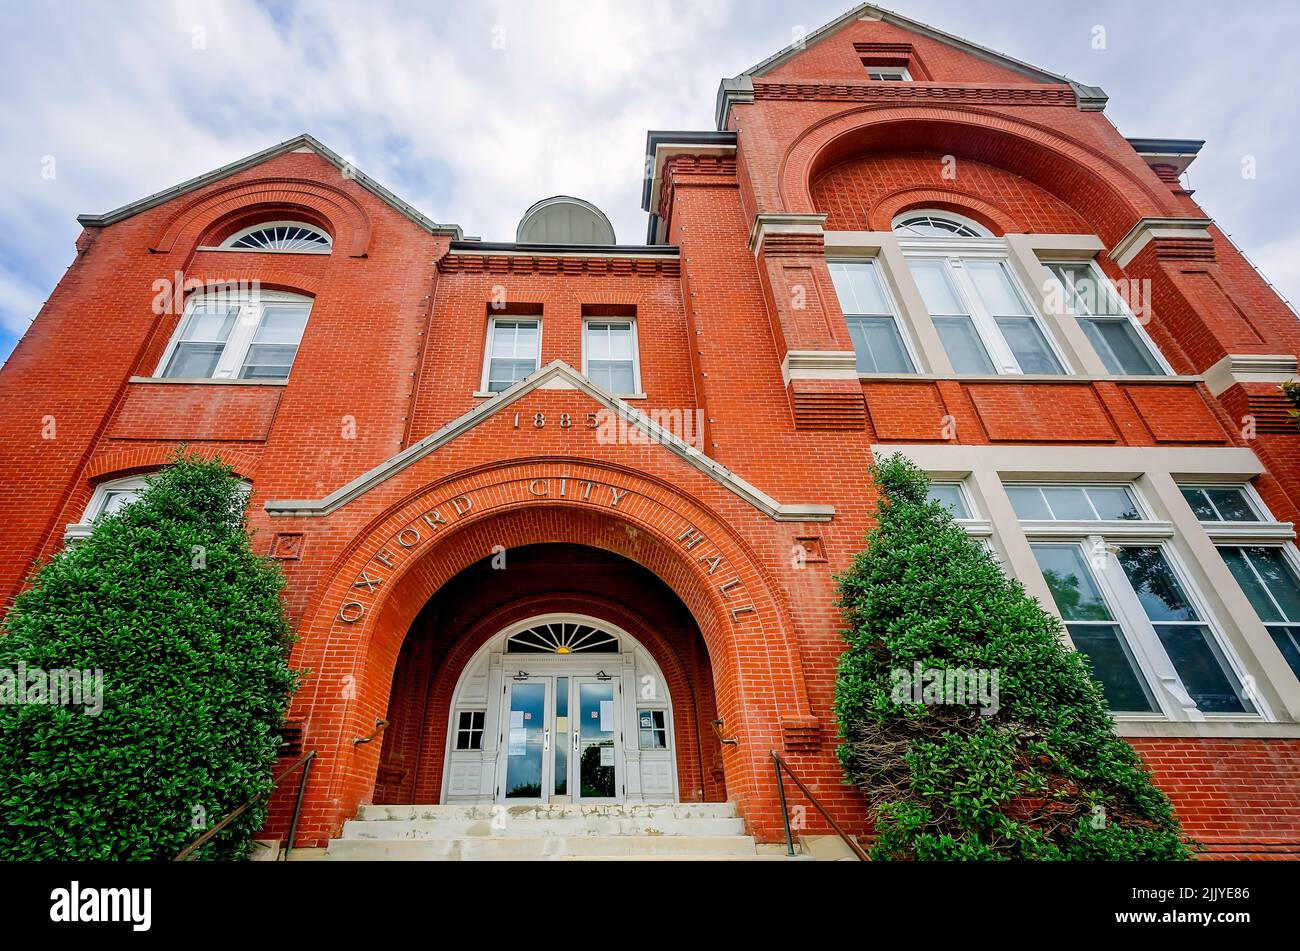 Oxford City Hall is pictured, May 31, 2015, in Oxford, Mississippi. Oxford City Hall was built in 1885 in the Romanesque Revival architectural style. Stock Photo